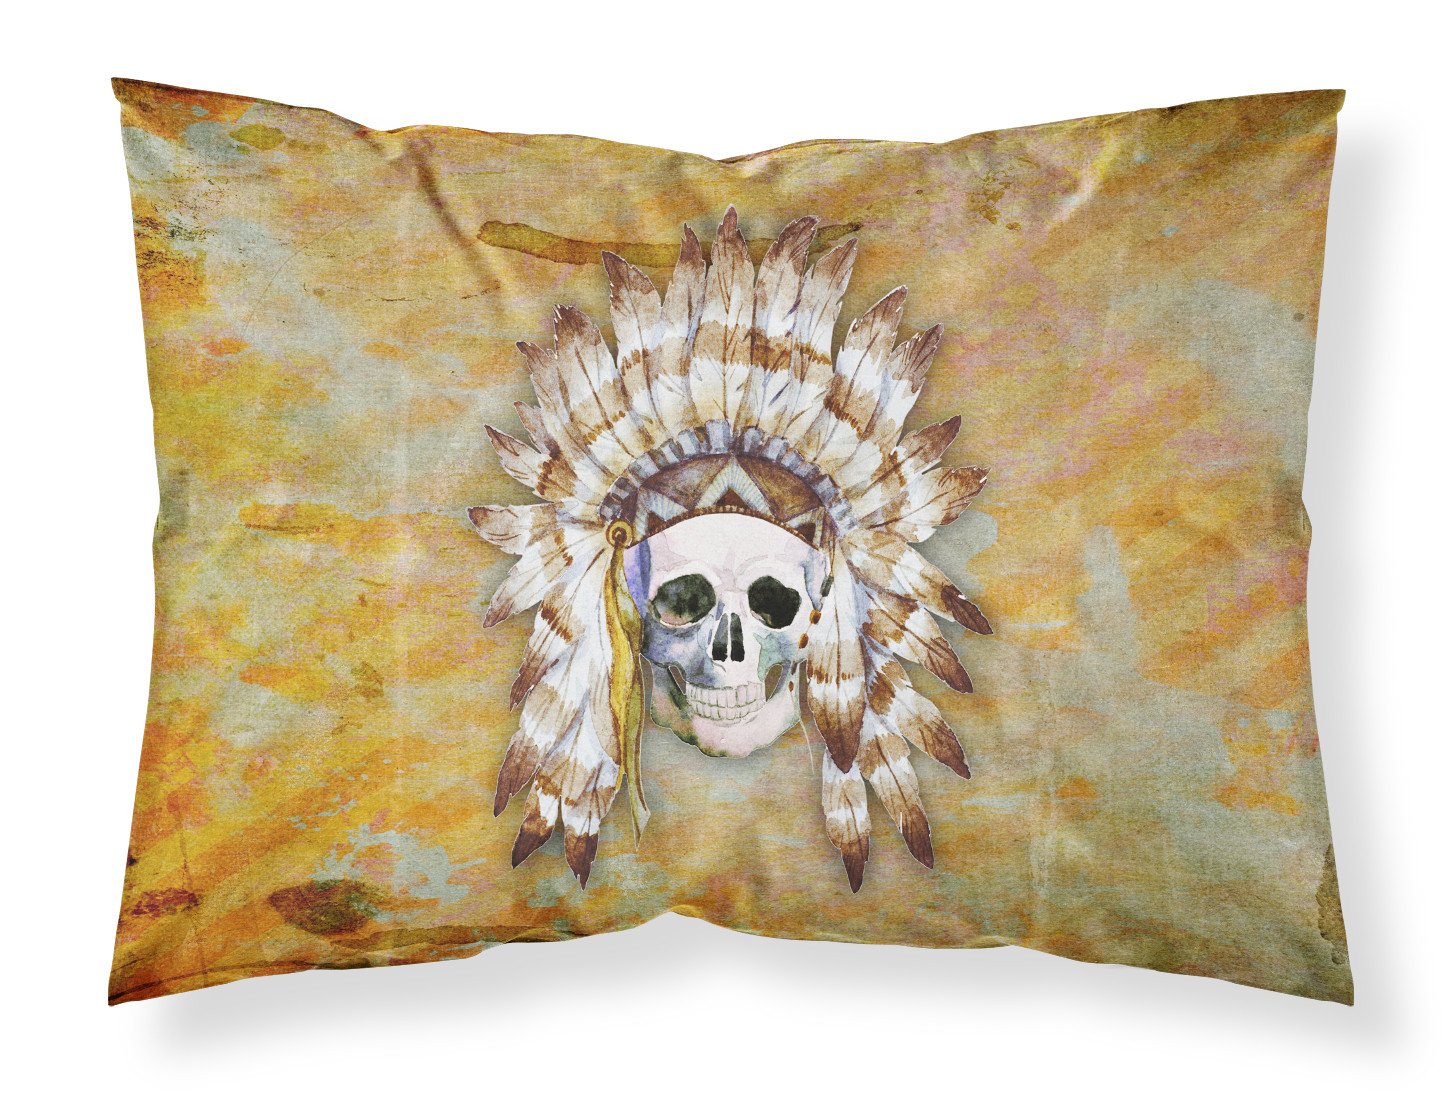 Day of the Dead Indian Skull Fabric Standard Pillowcase BB5121PILLOWCASE by Caroline's Treasures